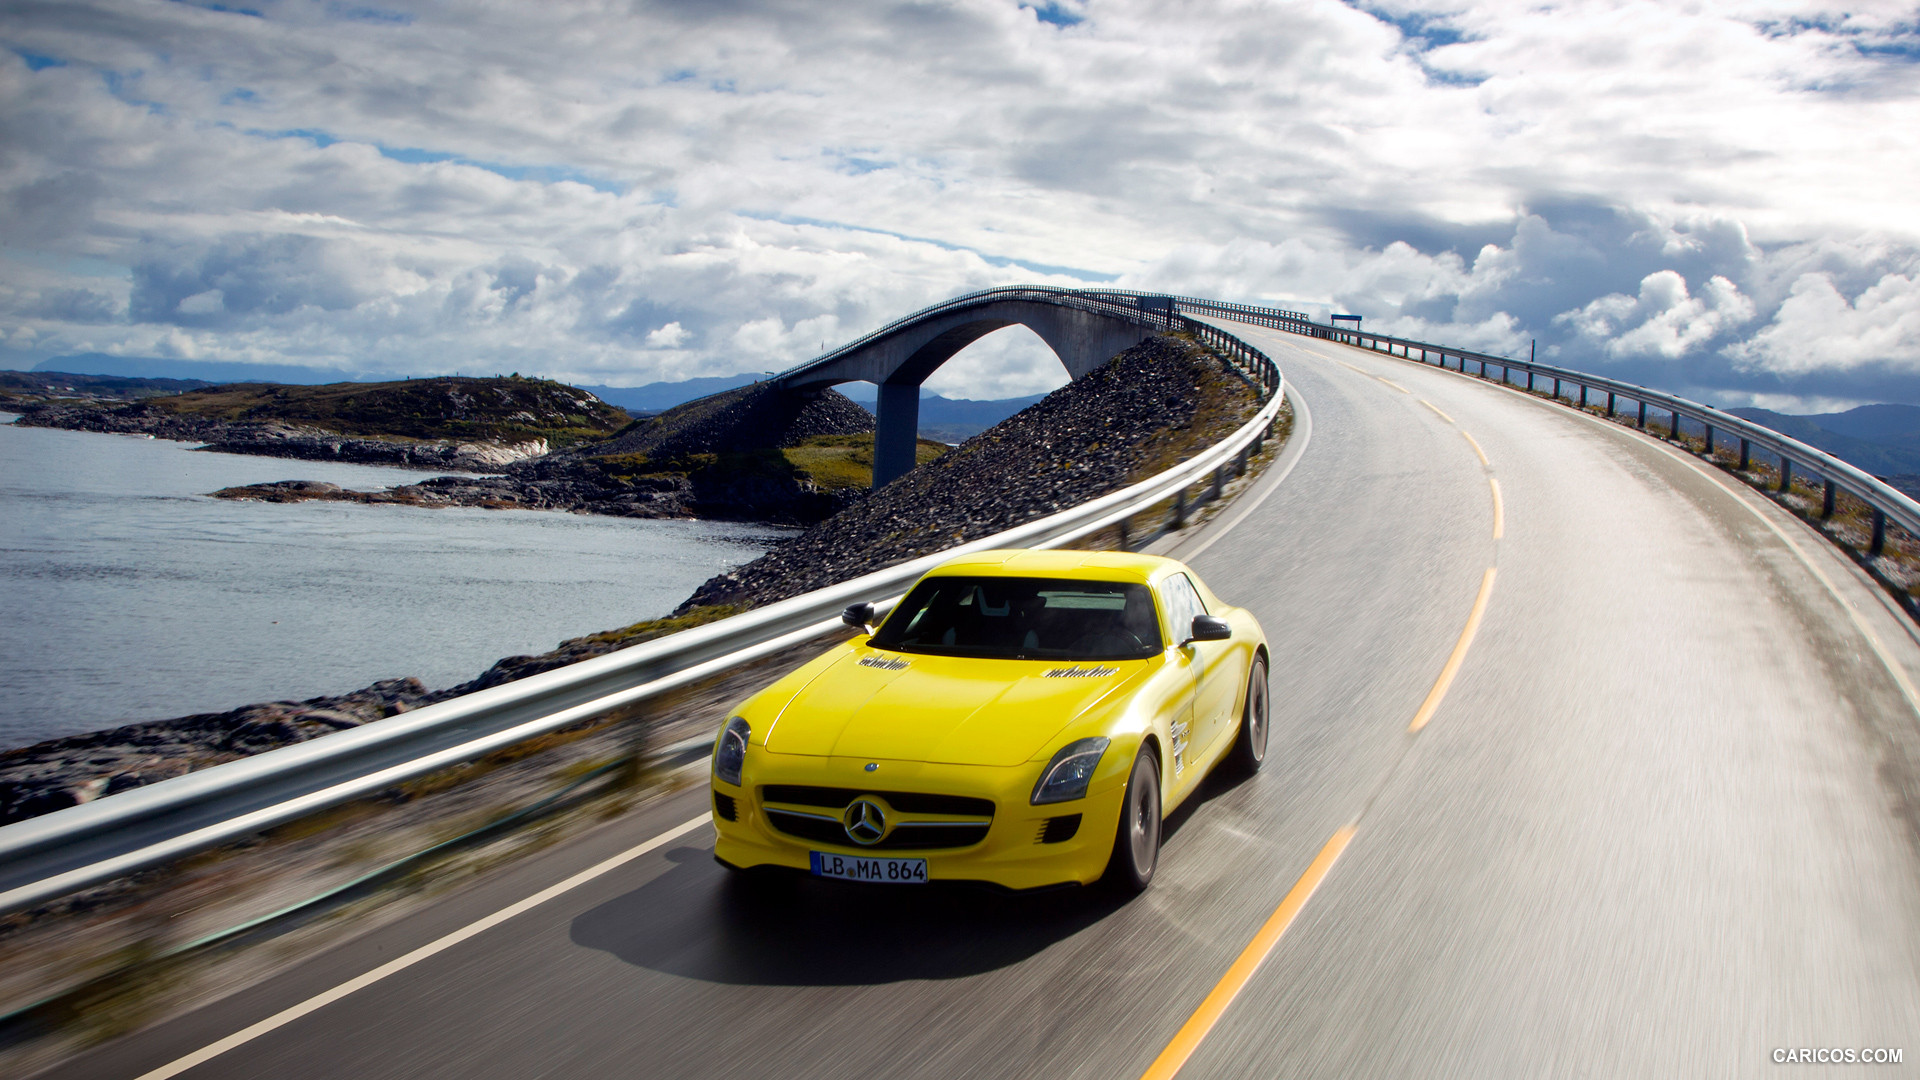 Mercedes-Benz SLS AMG E-CELL Concept  - Front, #9 of 60